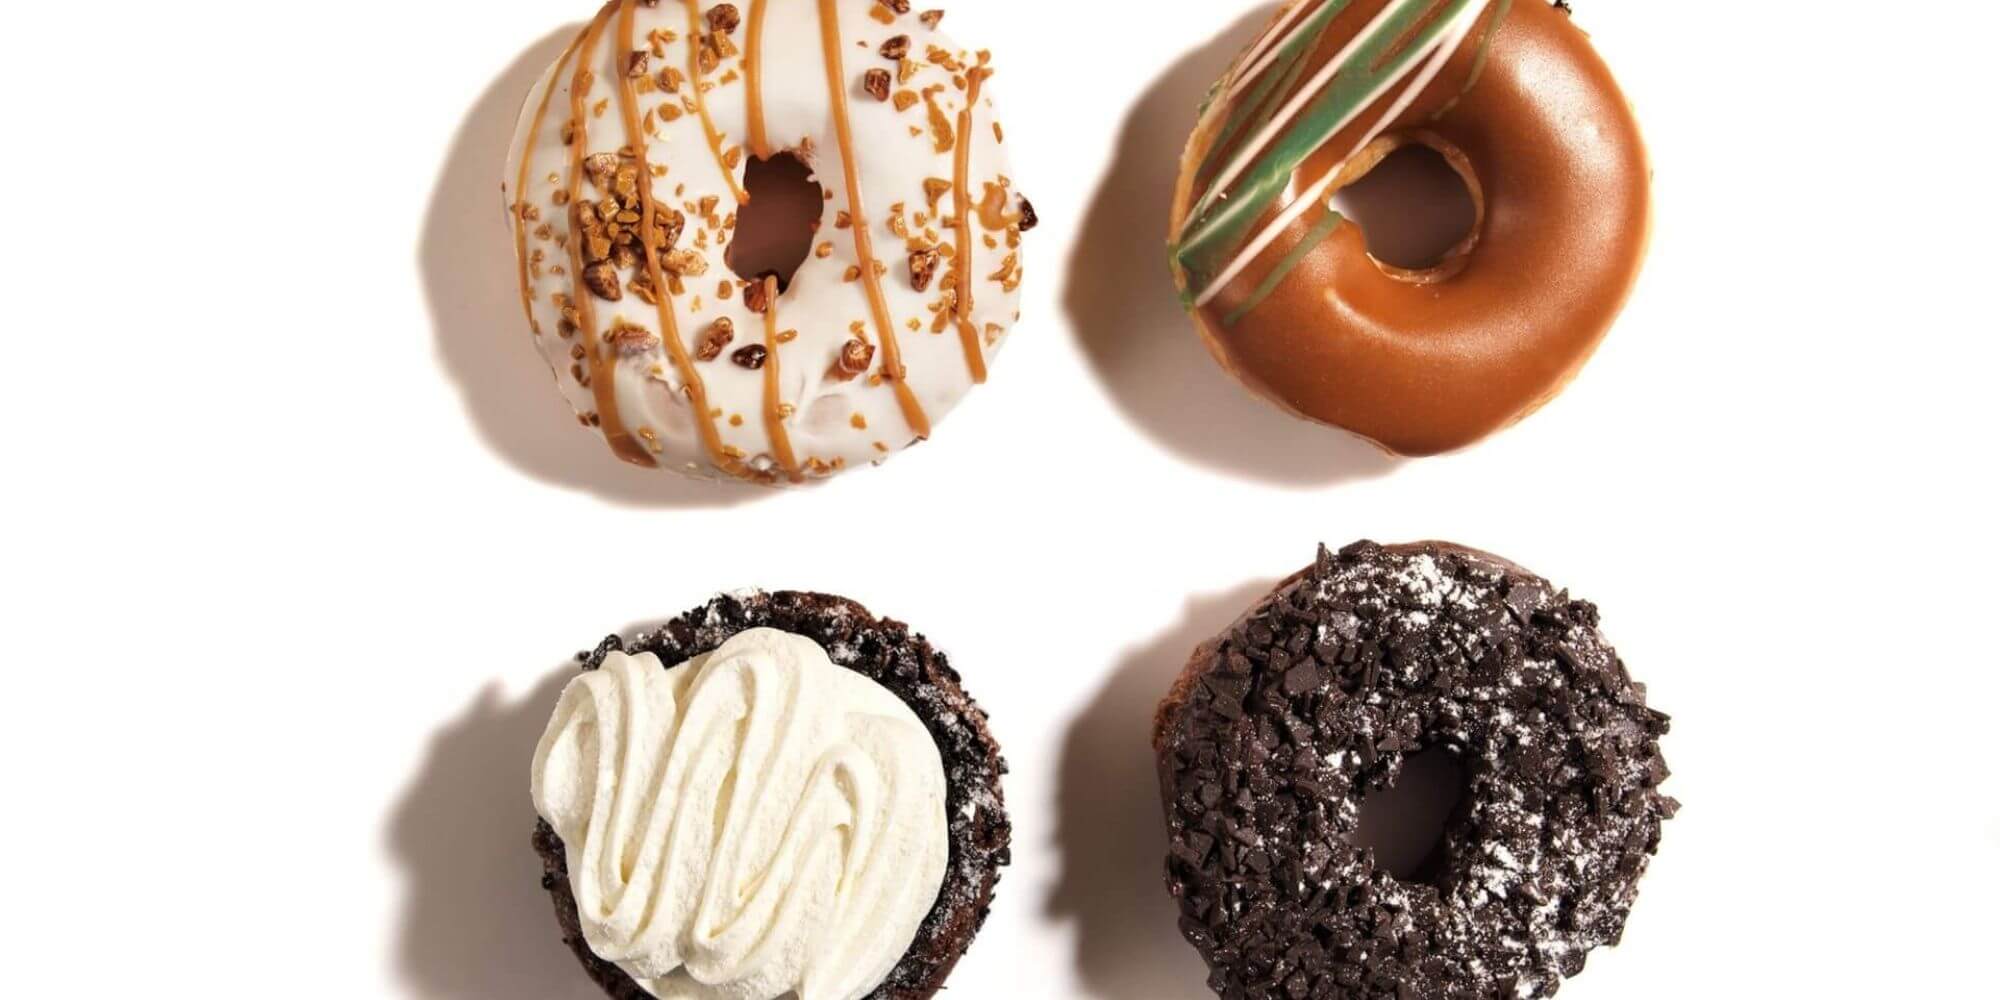 Four doughnuts laying next to each other against a white background all with different toppings.